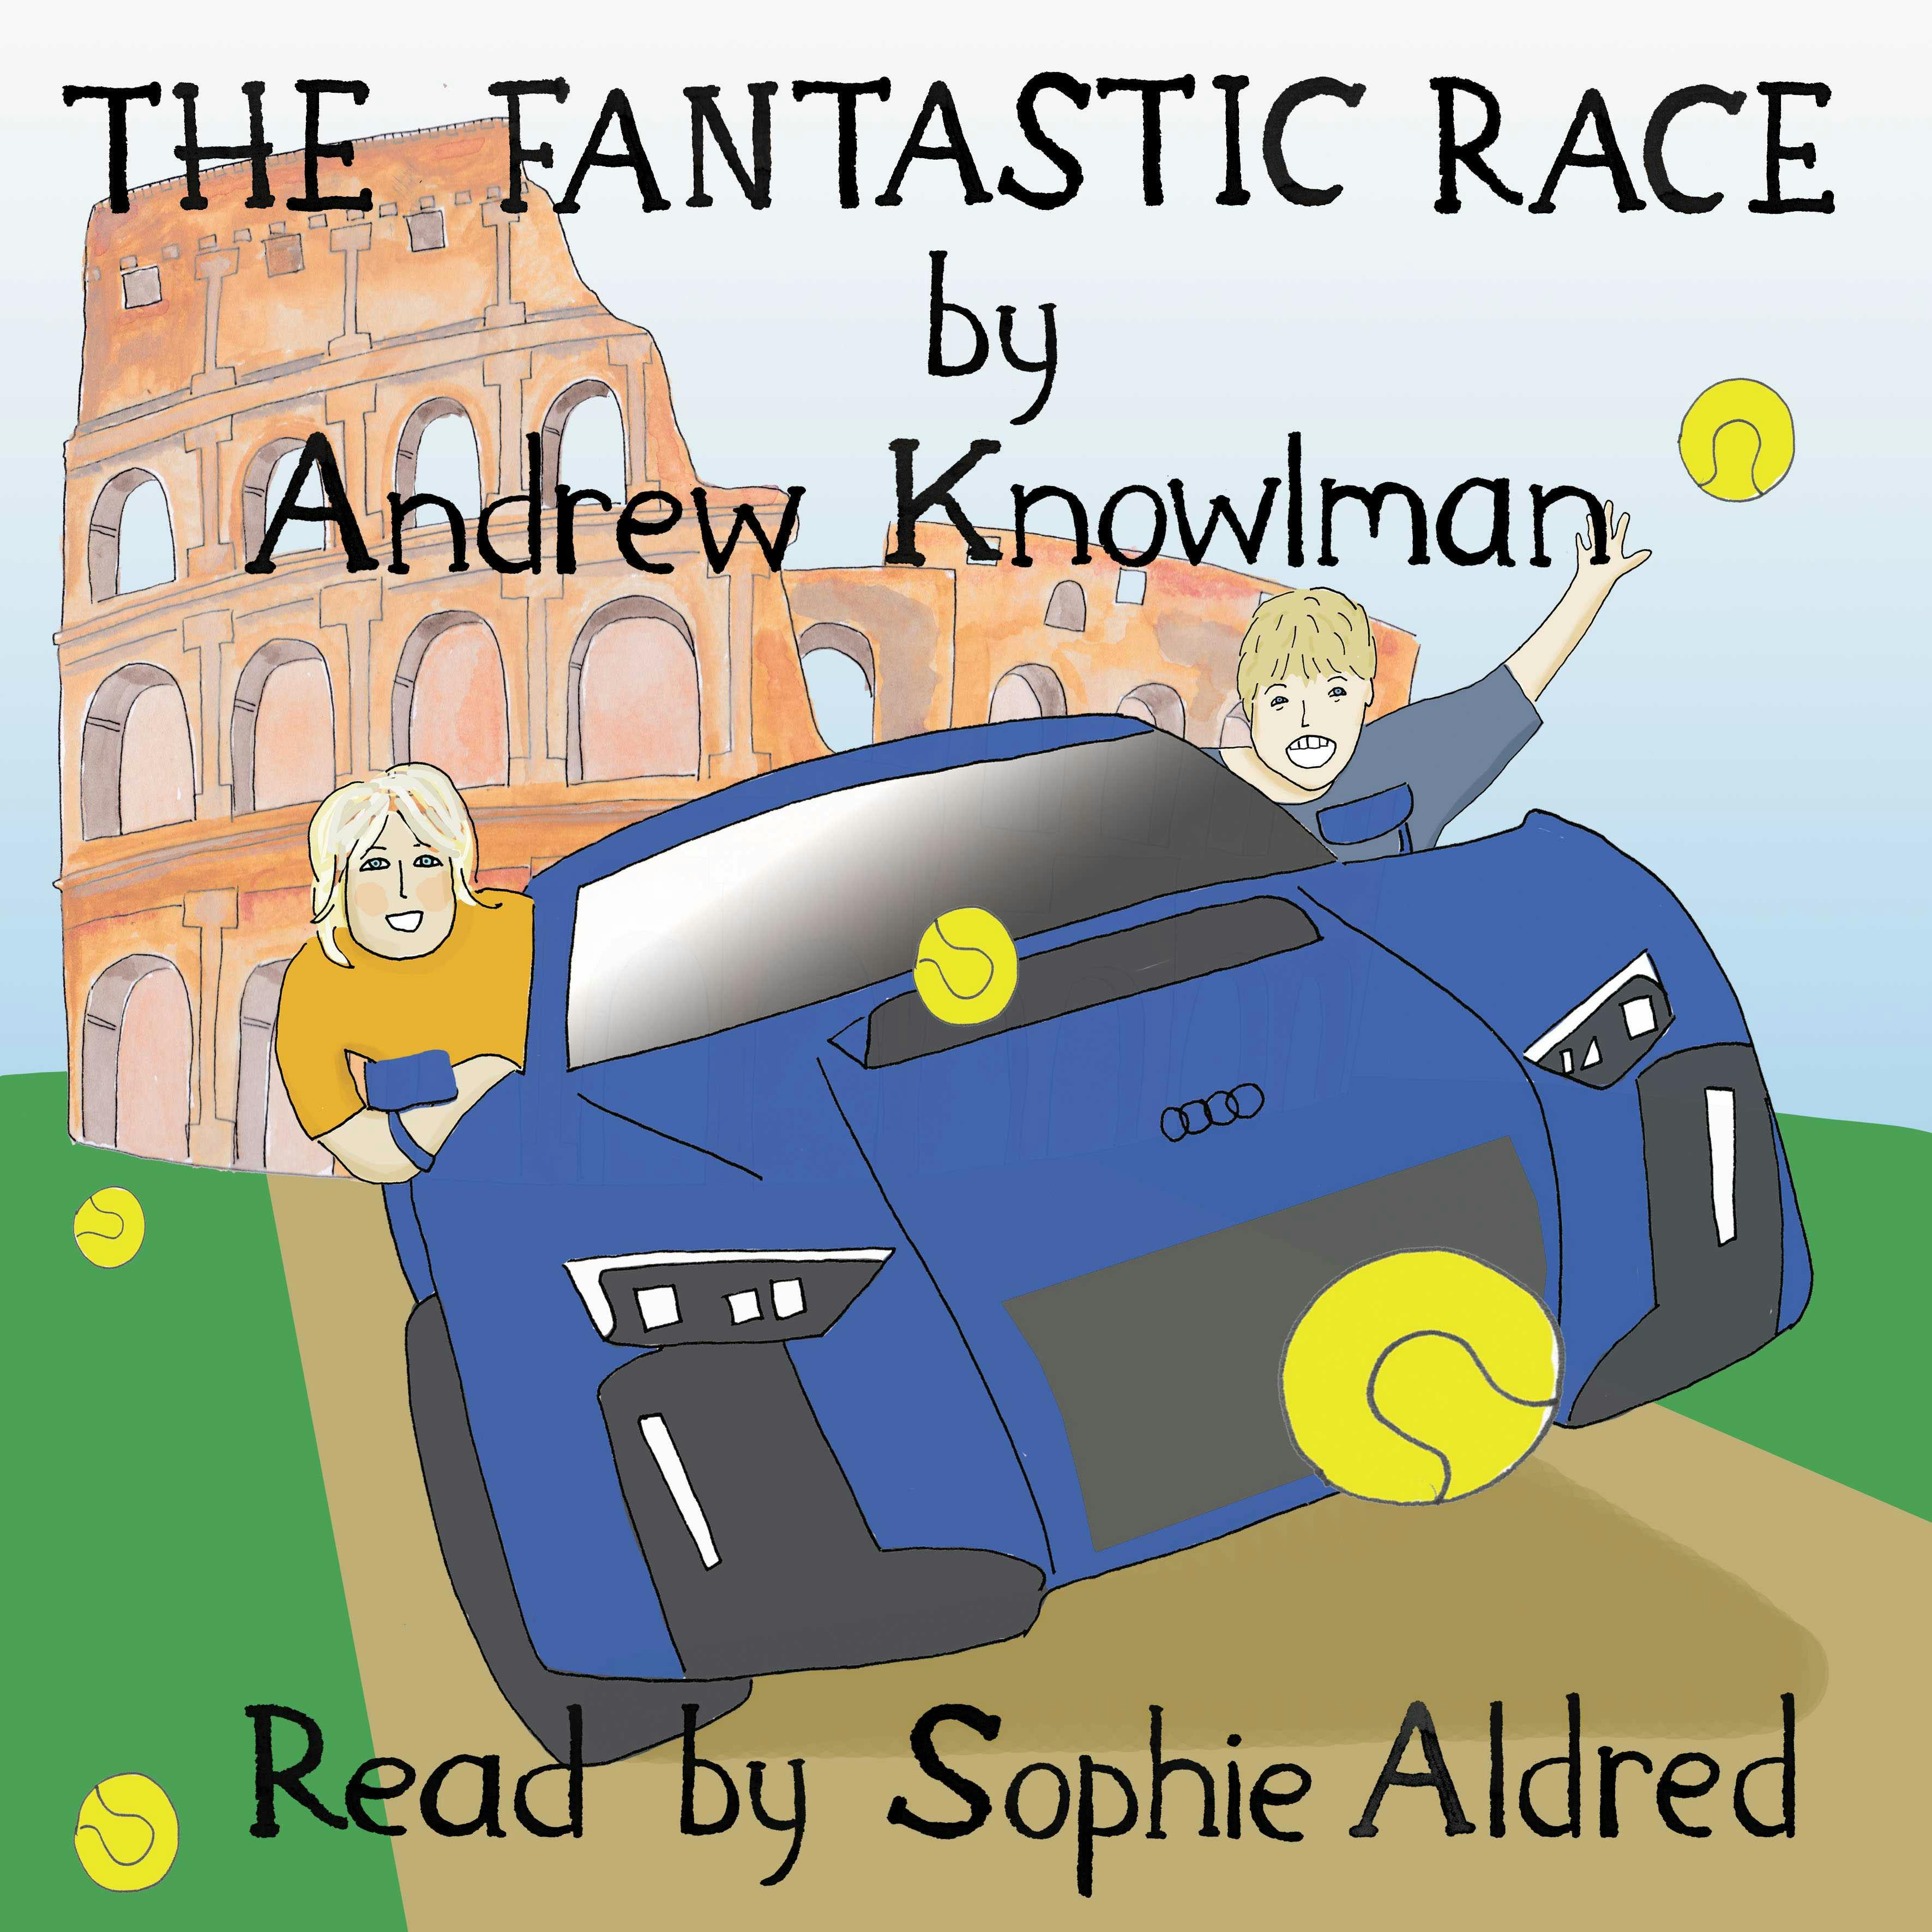 The Fantastic Race - undefined